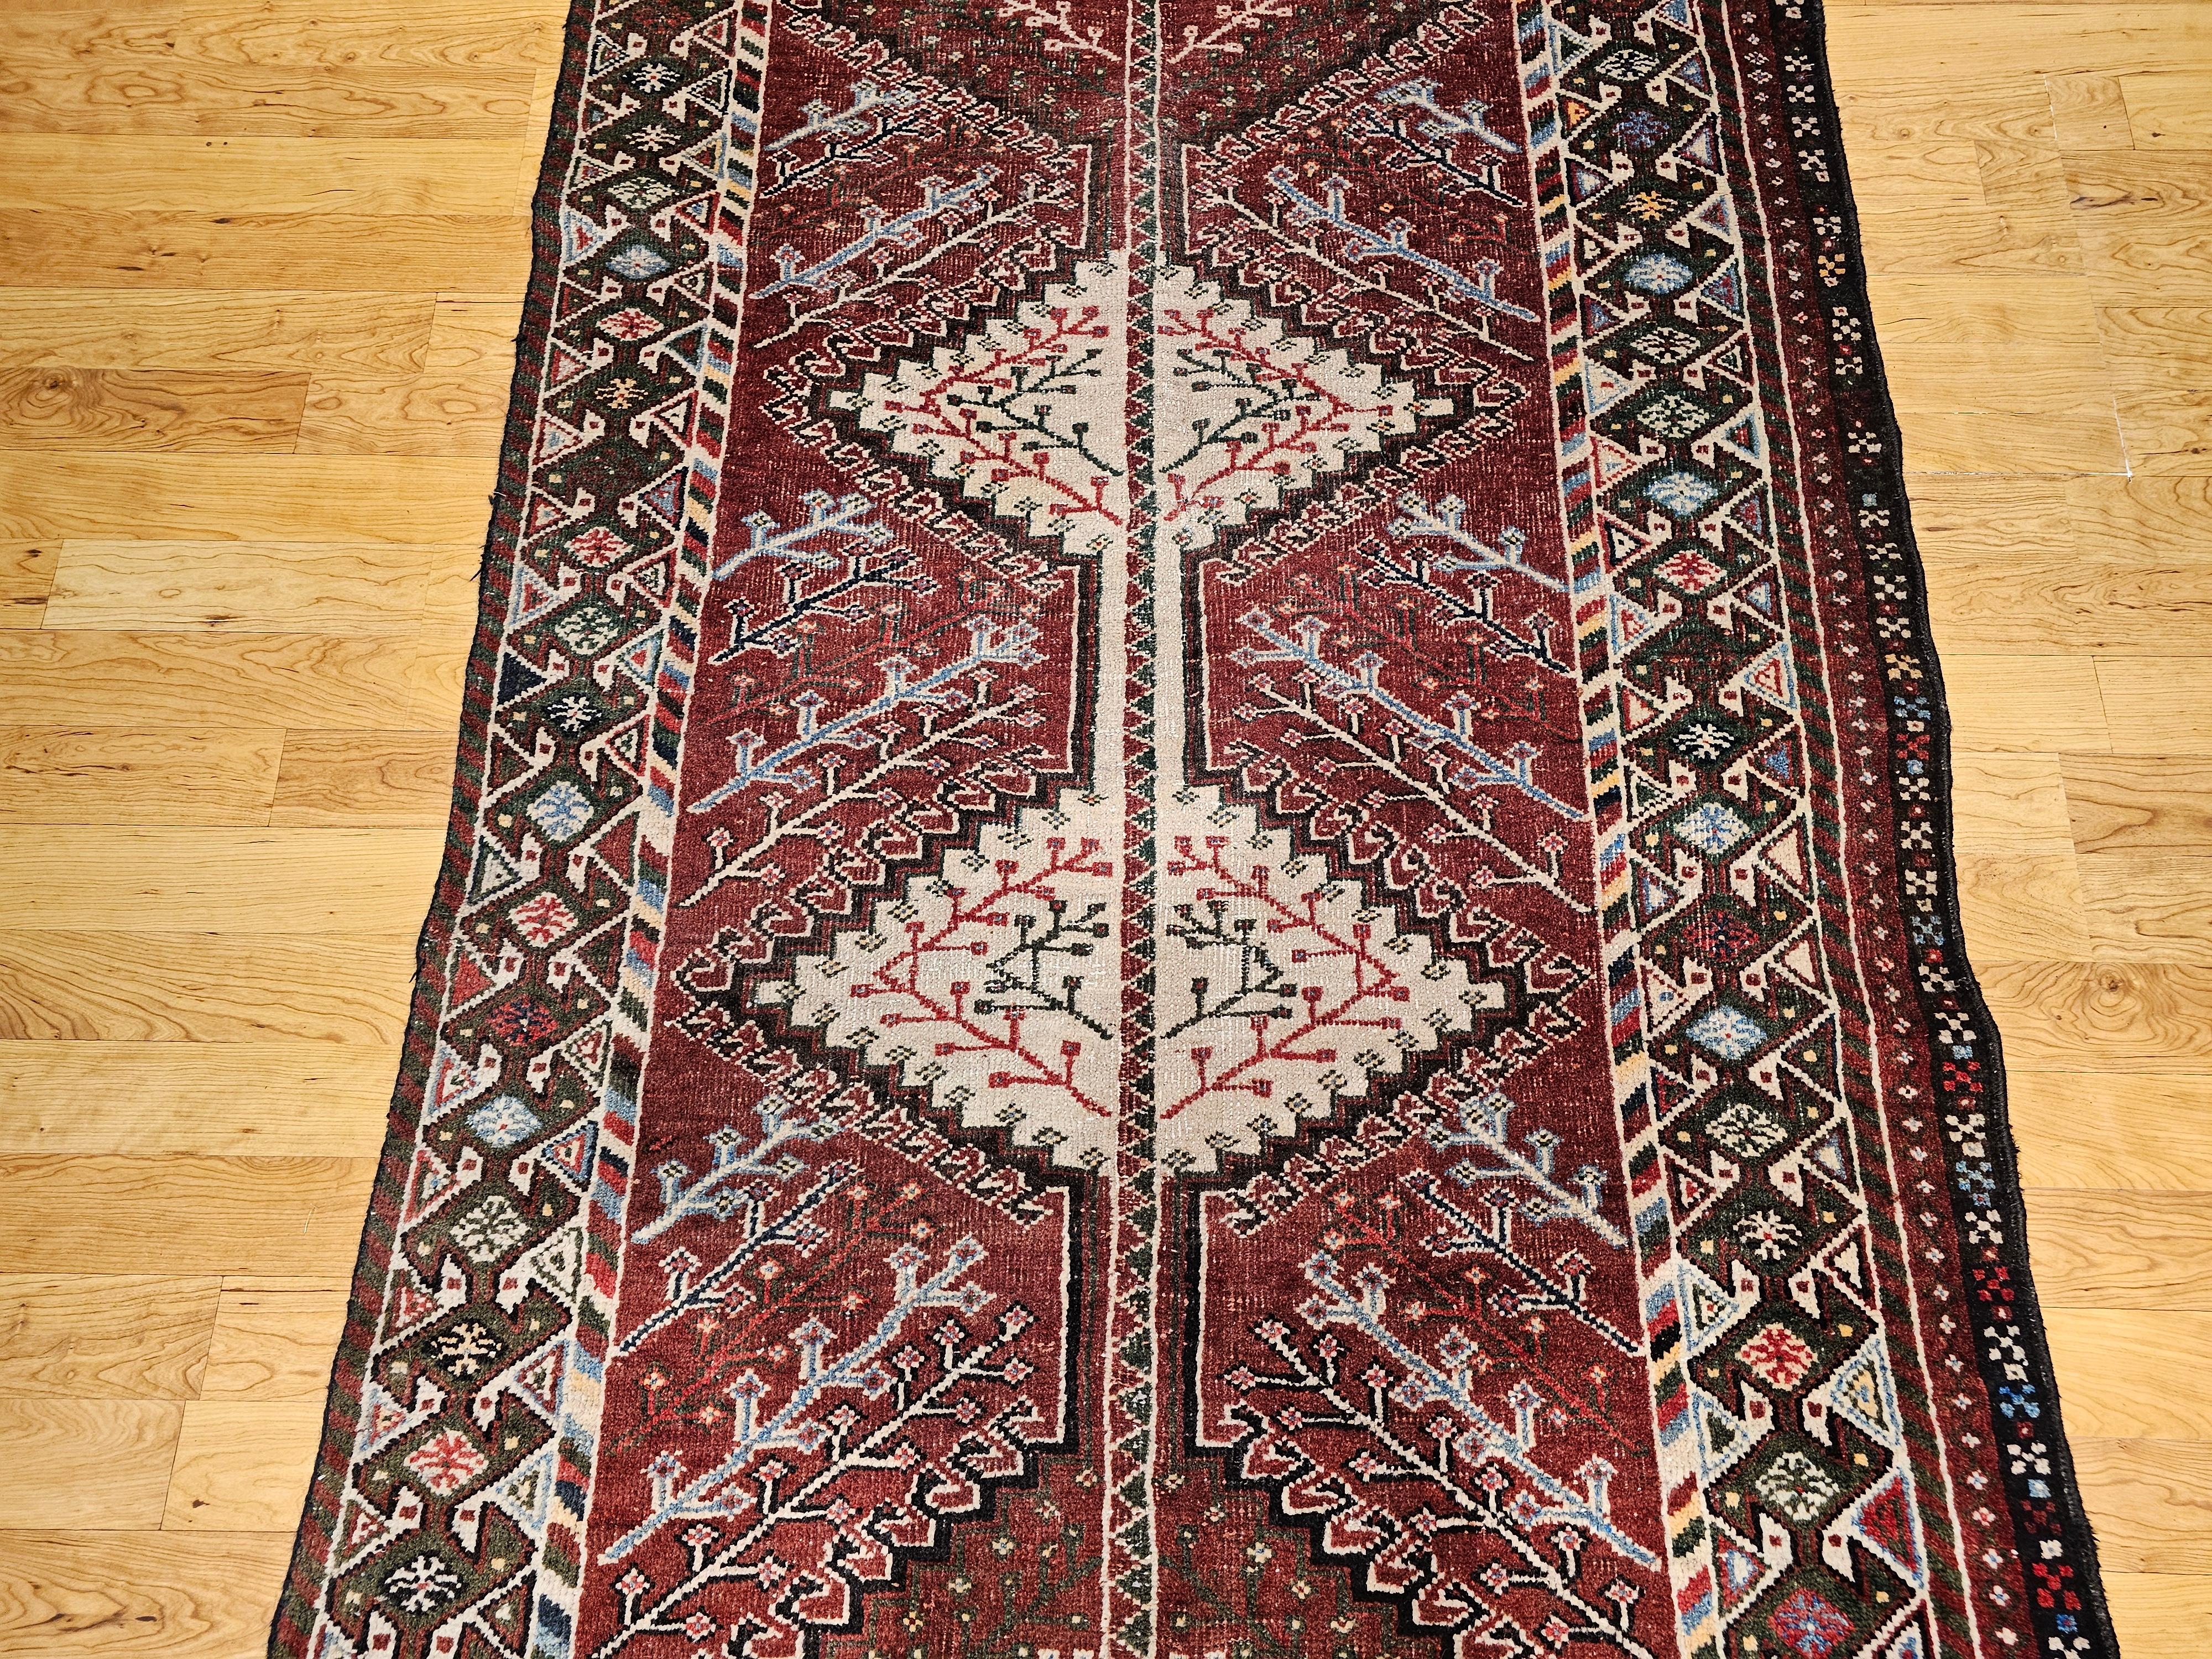 Vintage Persian Shiraz Tribal Area Rug in Burgundy, Ivory, Green, Blue In Good Condition For Sale In Barrington, IL